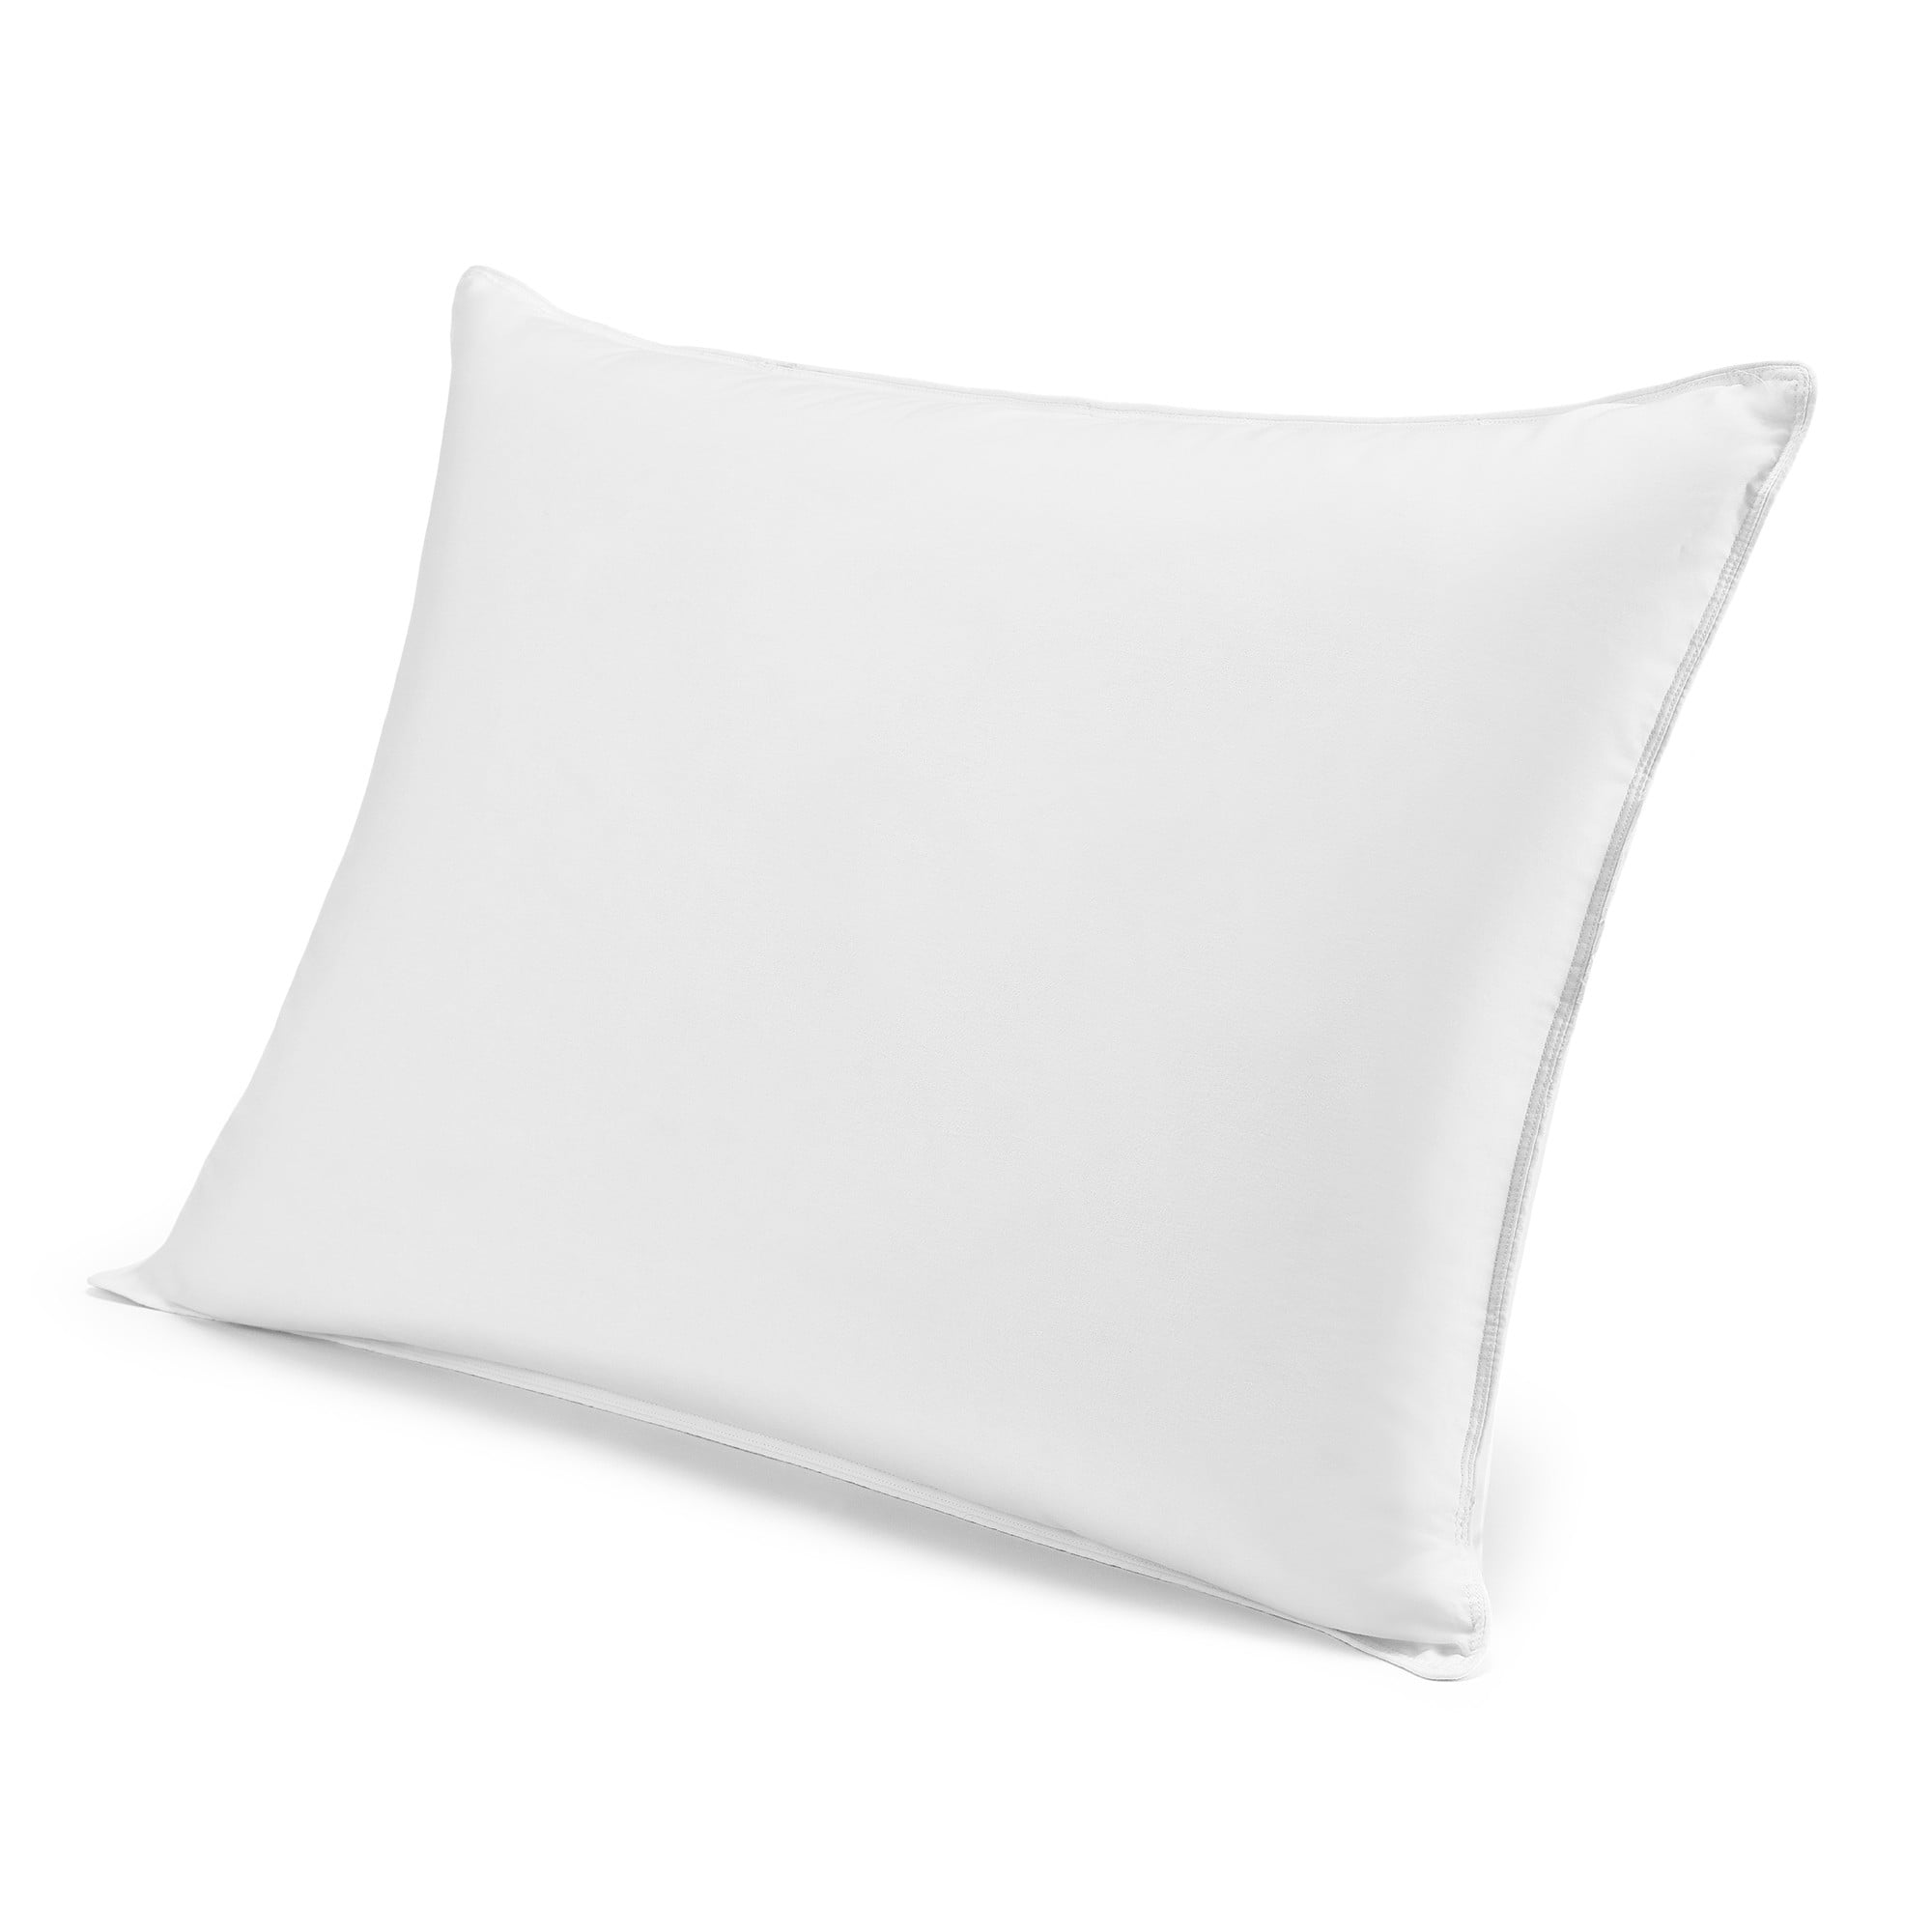 Best Bamboo Alternative Down Pillow Soft Hypoallergenic Polyester Queen Blissful Serenity Removable Cooling Cover- 100% SATISFACTION GUARANTEE Machine Washable Memory Foam Liner 